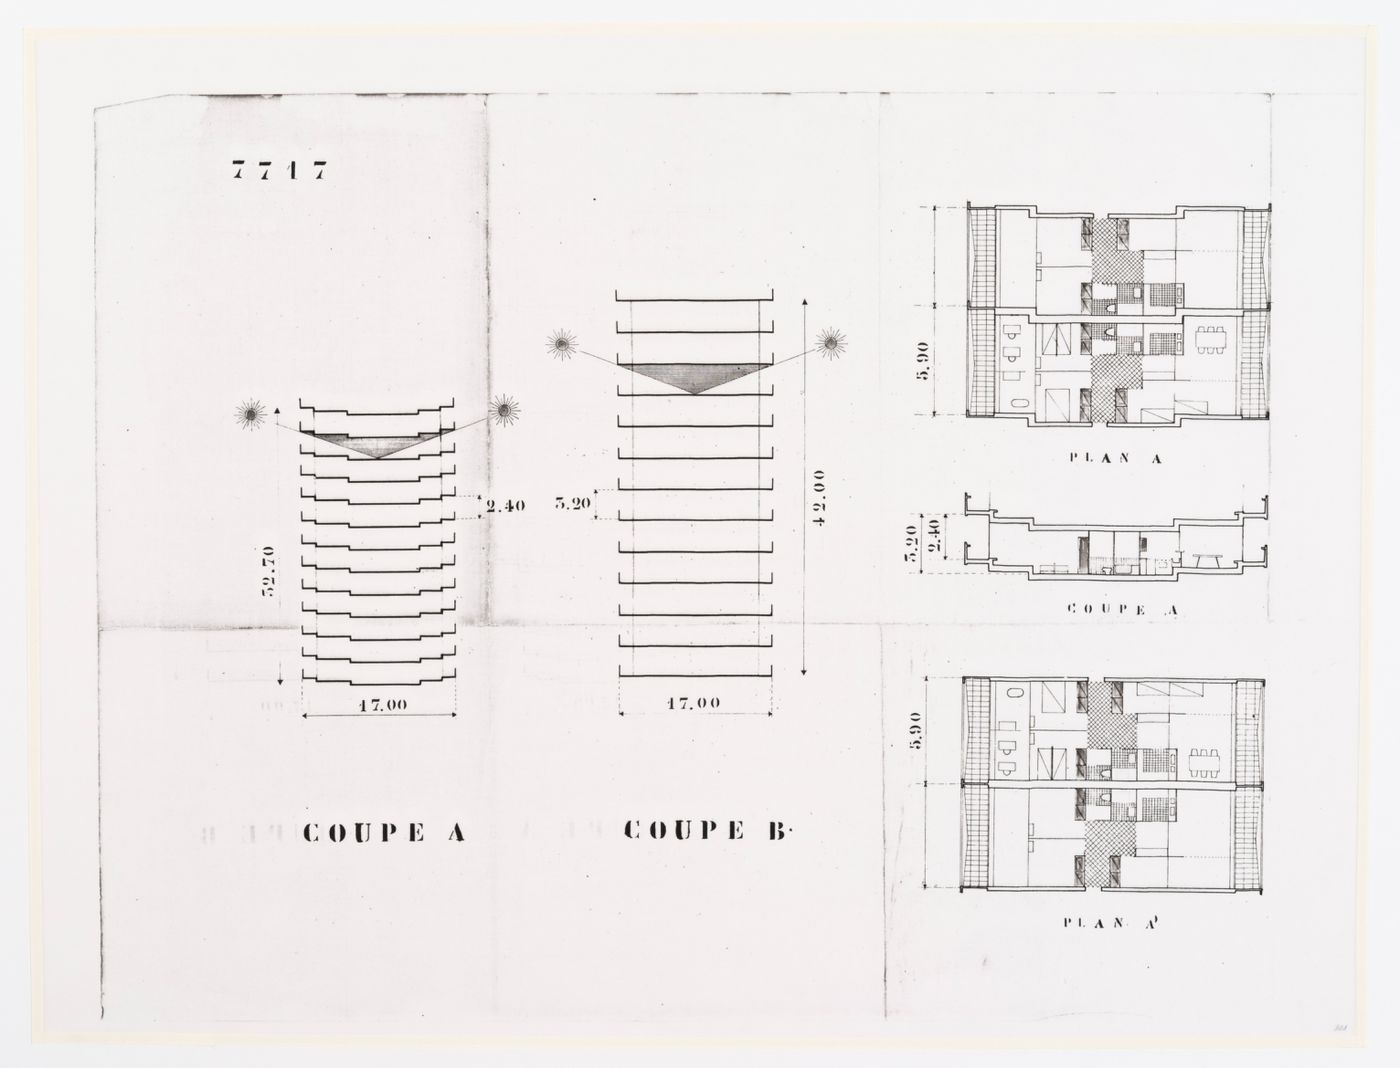 Sections and floor plans for Communal multi-storey dwellings in Europe